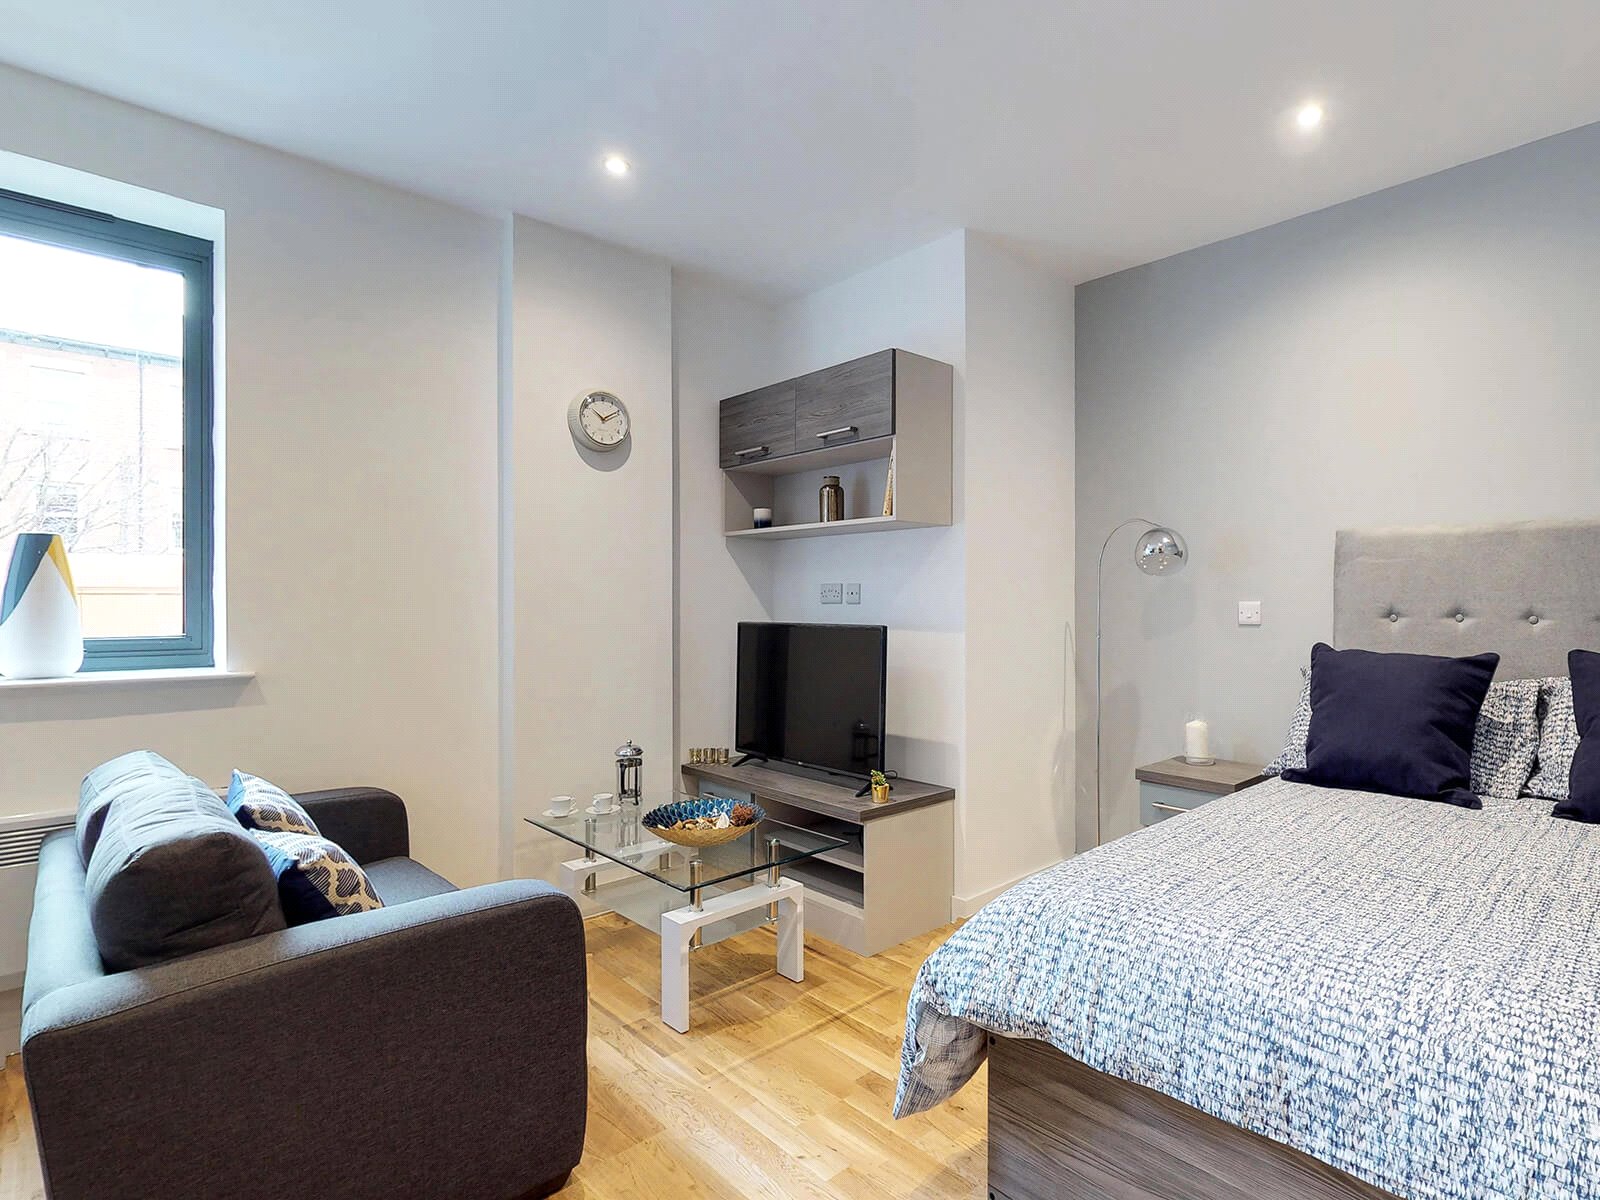 0 bed apartment for rent in Sheffield. From YPP - Sheffield